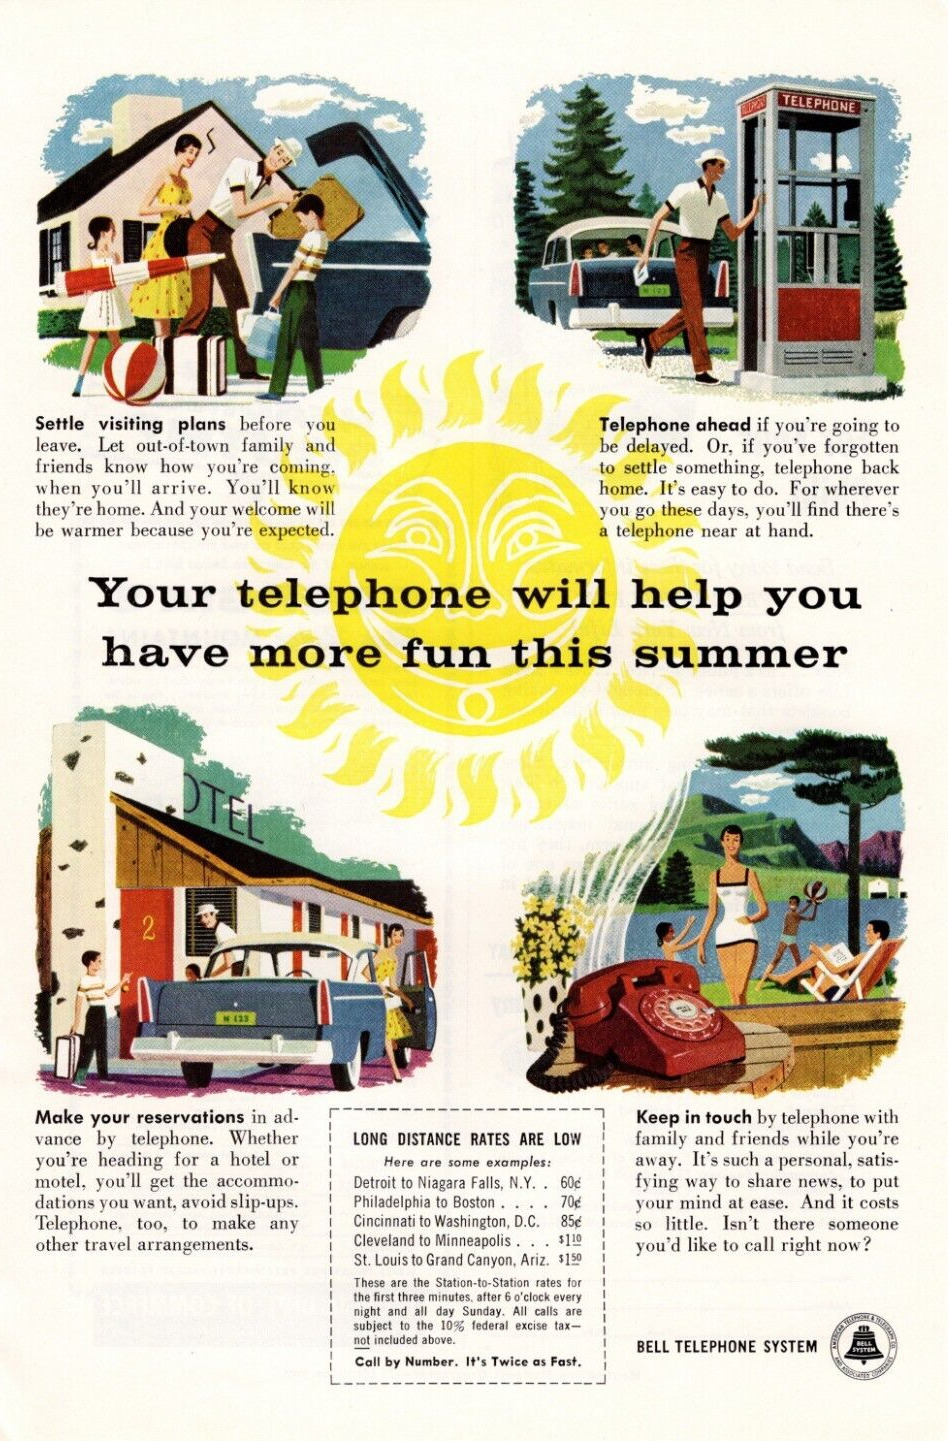 BELL TELEPHONE SYSTEM Summer Vacation 1956 Magazine Print Advertising